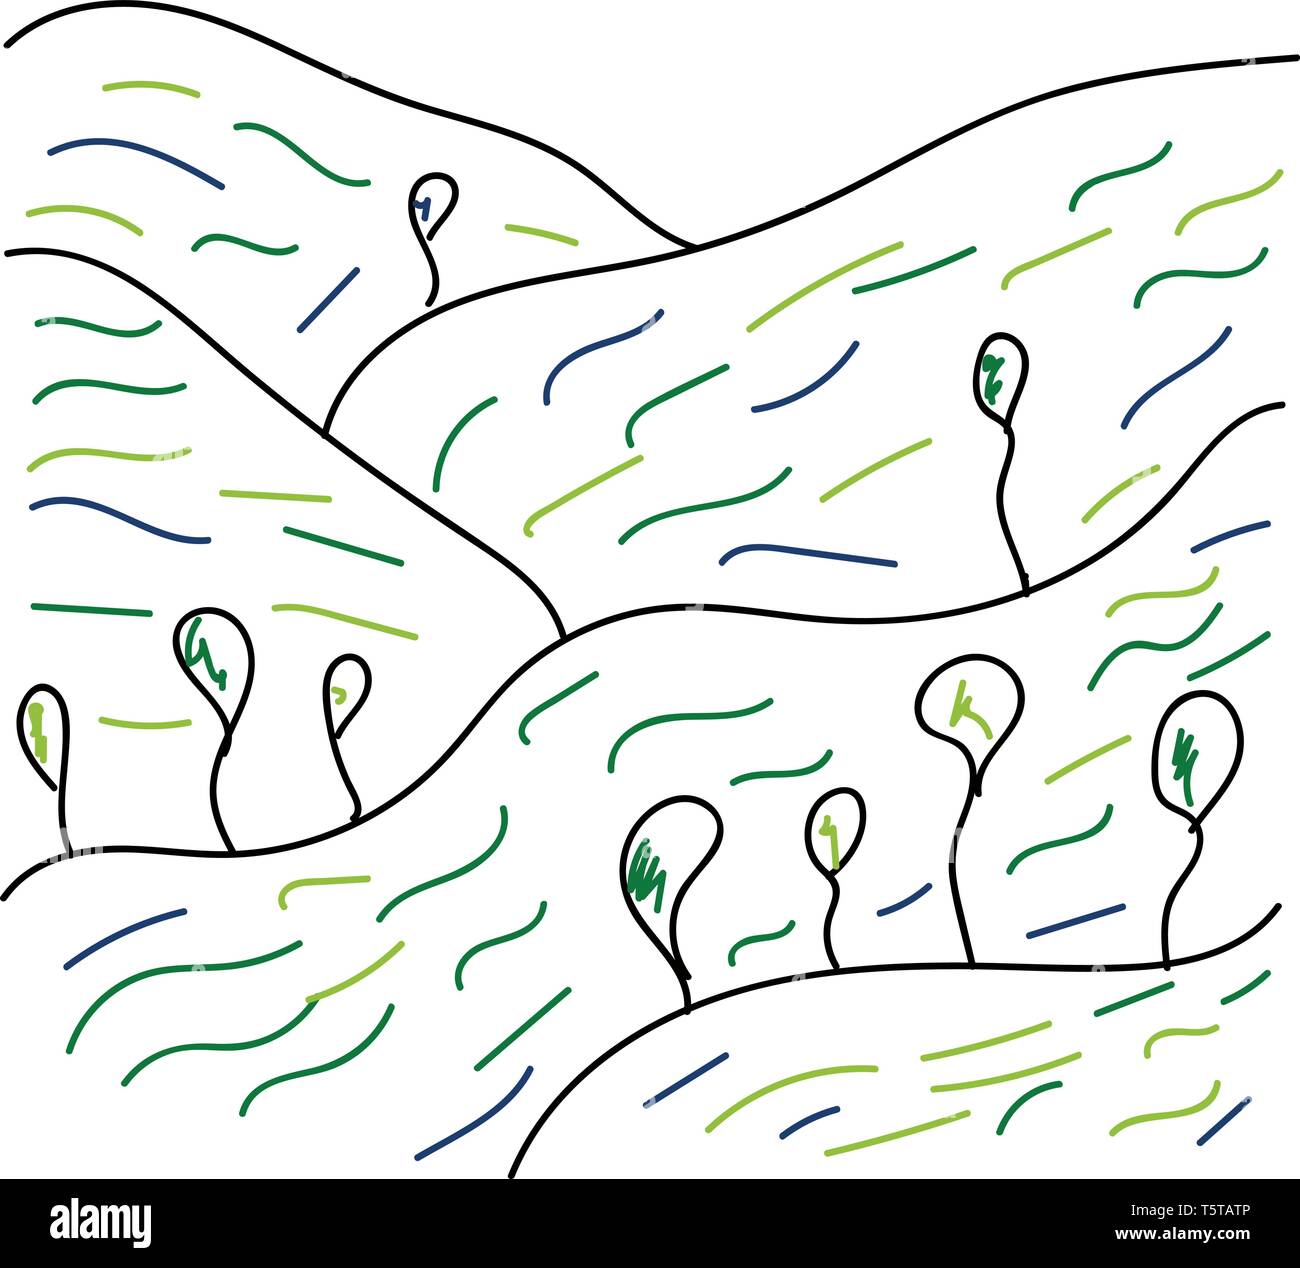 Line art of trees and mountains in different colors like black green and blue vector color drawing or illustration Stock Vector